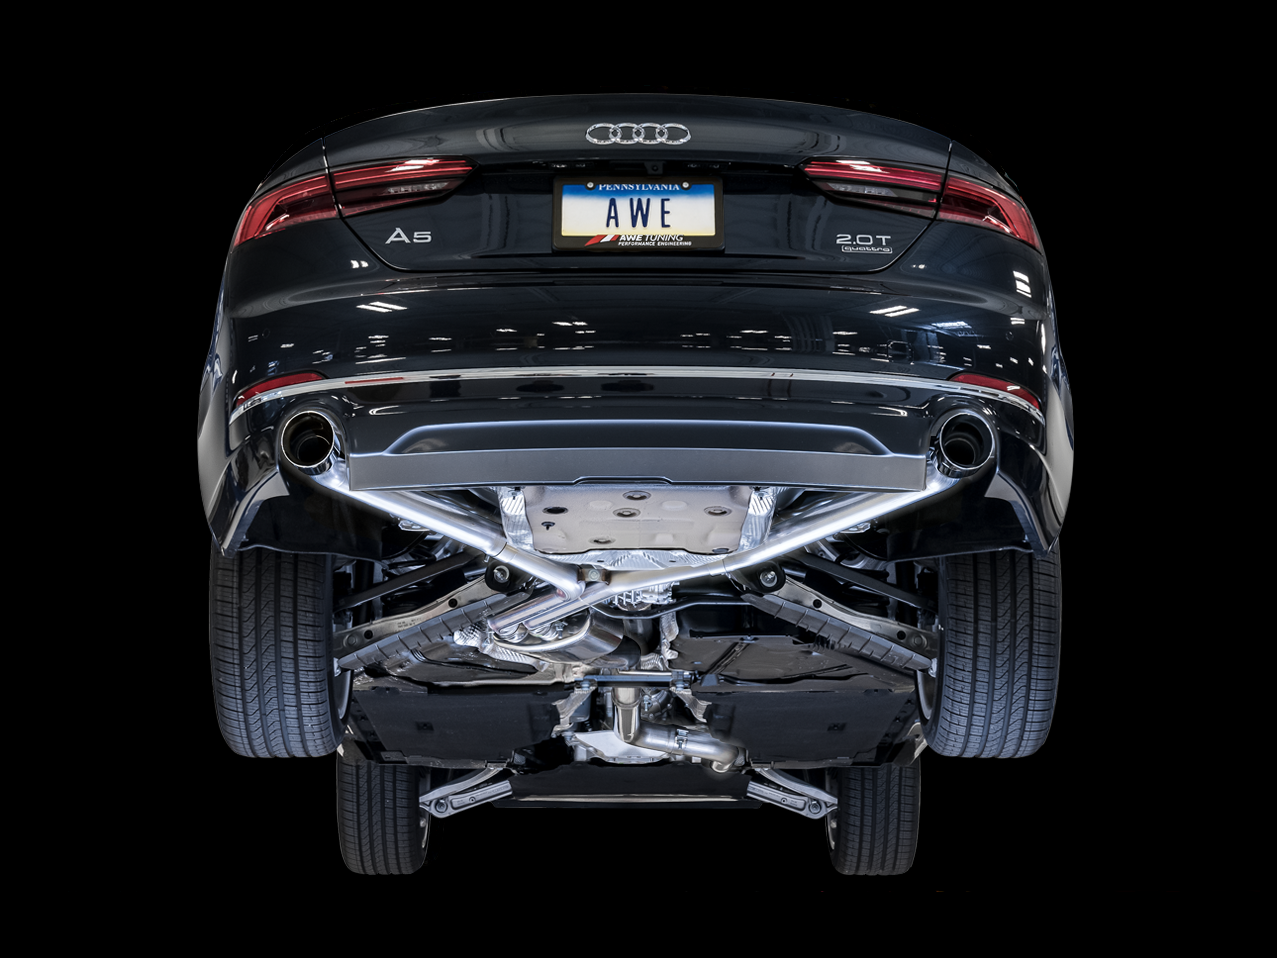 AWE Tuning Audi B9 A5 2.0T Exhaust Suite - AWE